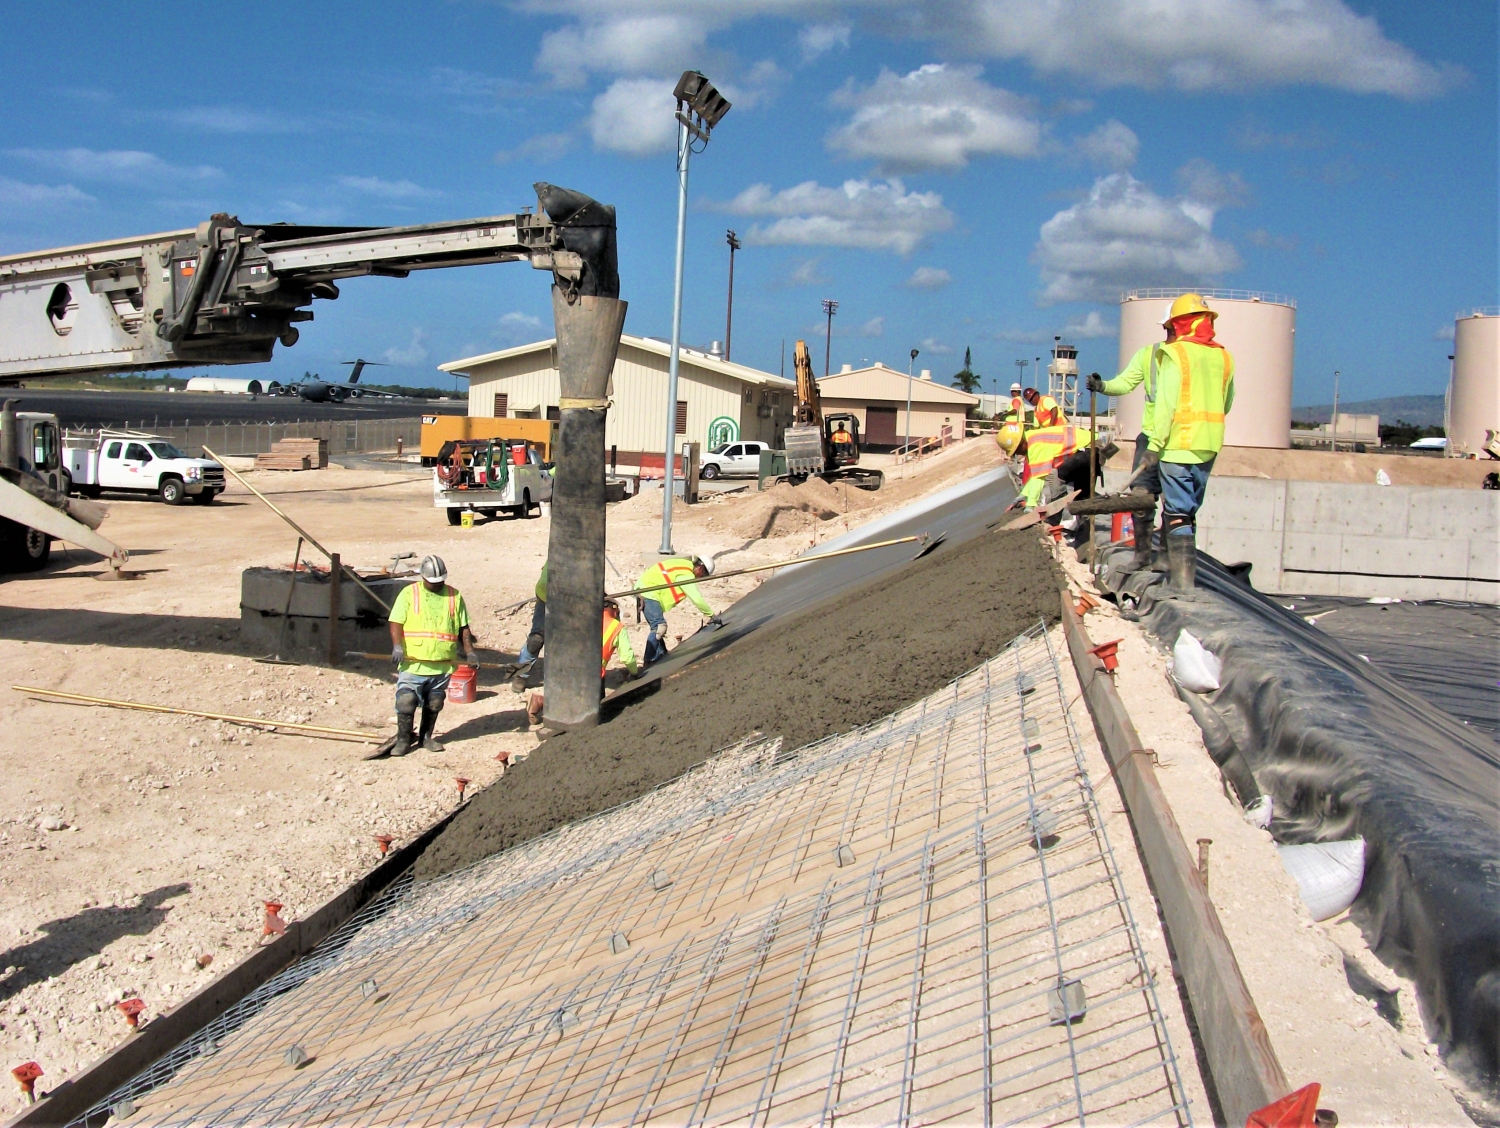 Pouring concrete for the fuel containment area